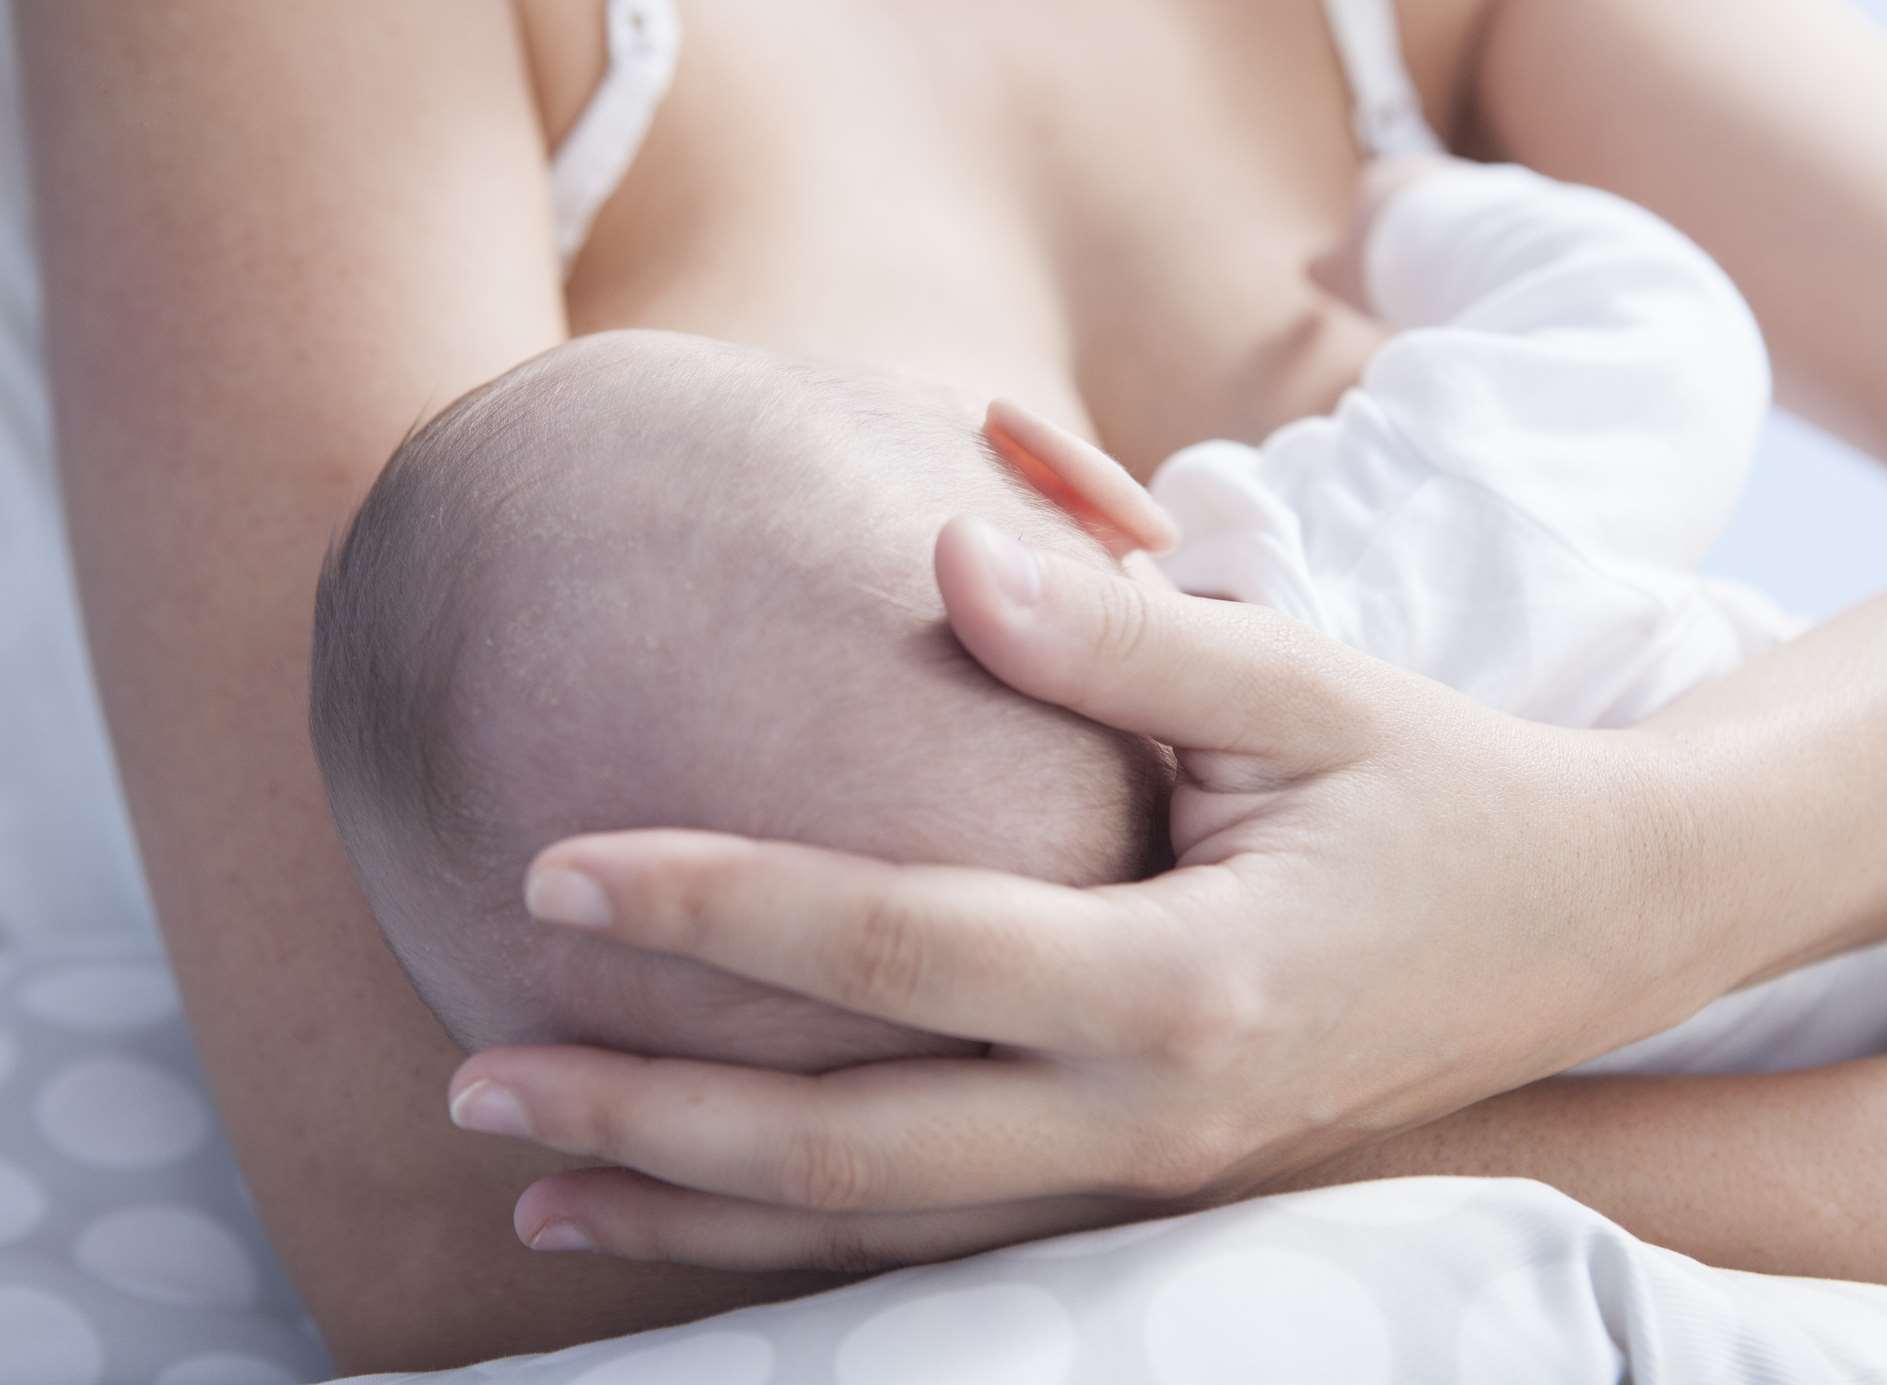 The law protects mums who choose to breastfeed in public